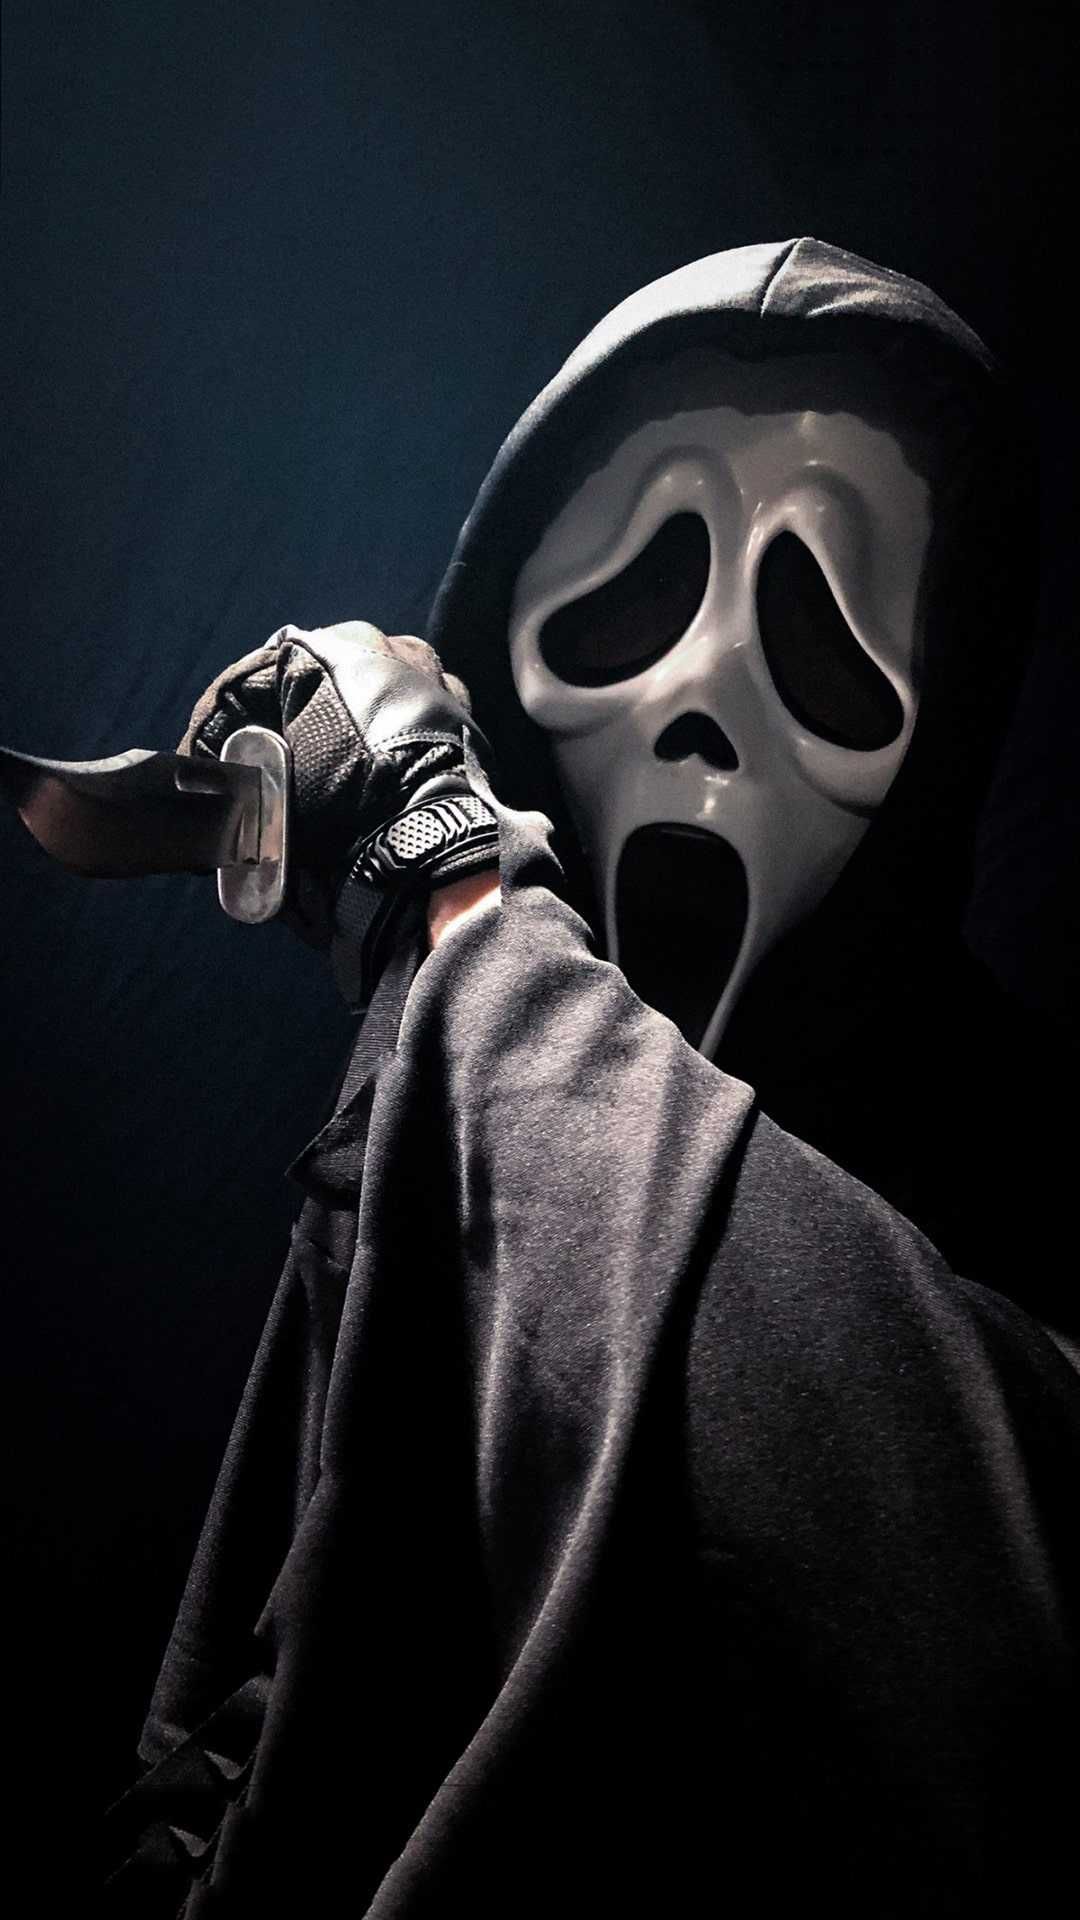 Scream Wallpaper Browse Scream Wallpaper with collections of Cool, Dark, Desktop, iPhone, Movie.. Horror movie tattoos, Ghostface scream, Ghostface